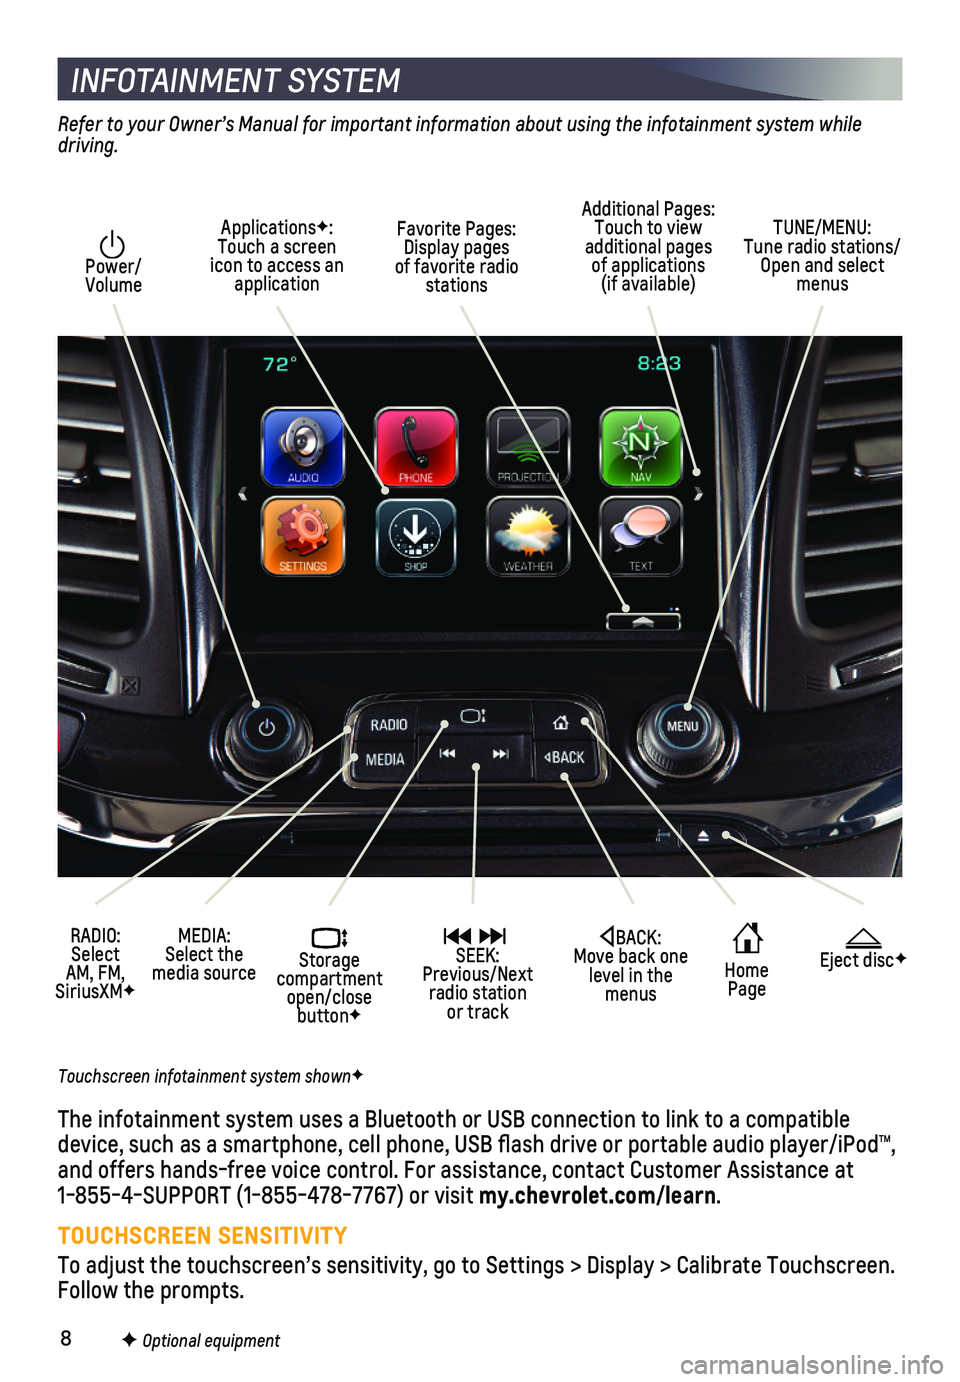 CHEVROLET IMPALA 2020  Get To Know Guide 8
INFOTAINMENT SYSTEM
 Power/ Volume
RADIO: Select AM, FM, SiriusXMF
ApplicationsF: Touch a screen icon to access an application
Additional Pages: Touch to view additional pages of applications  (if a